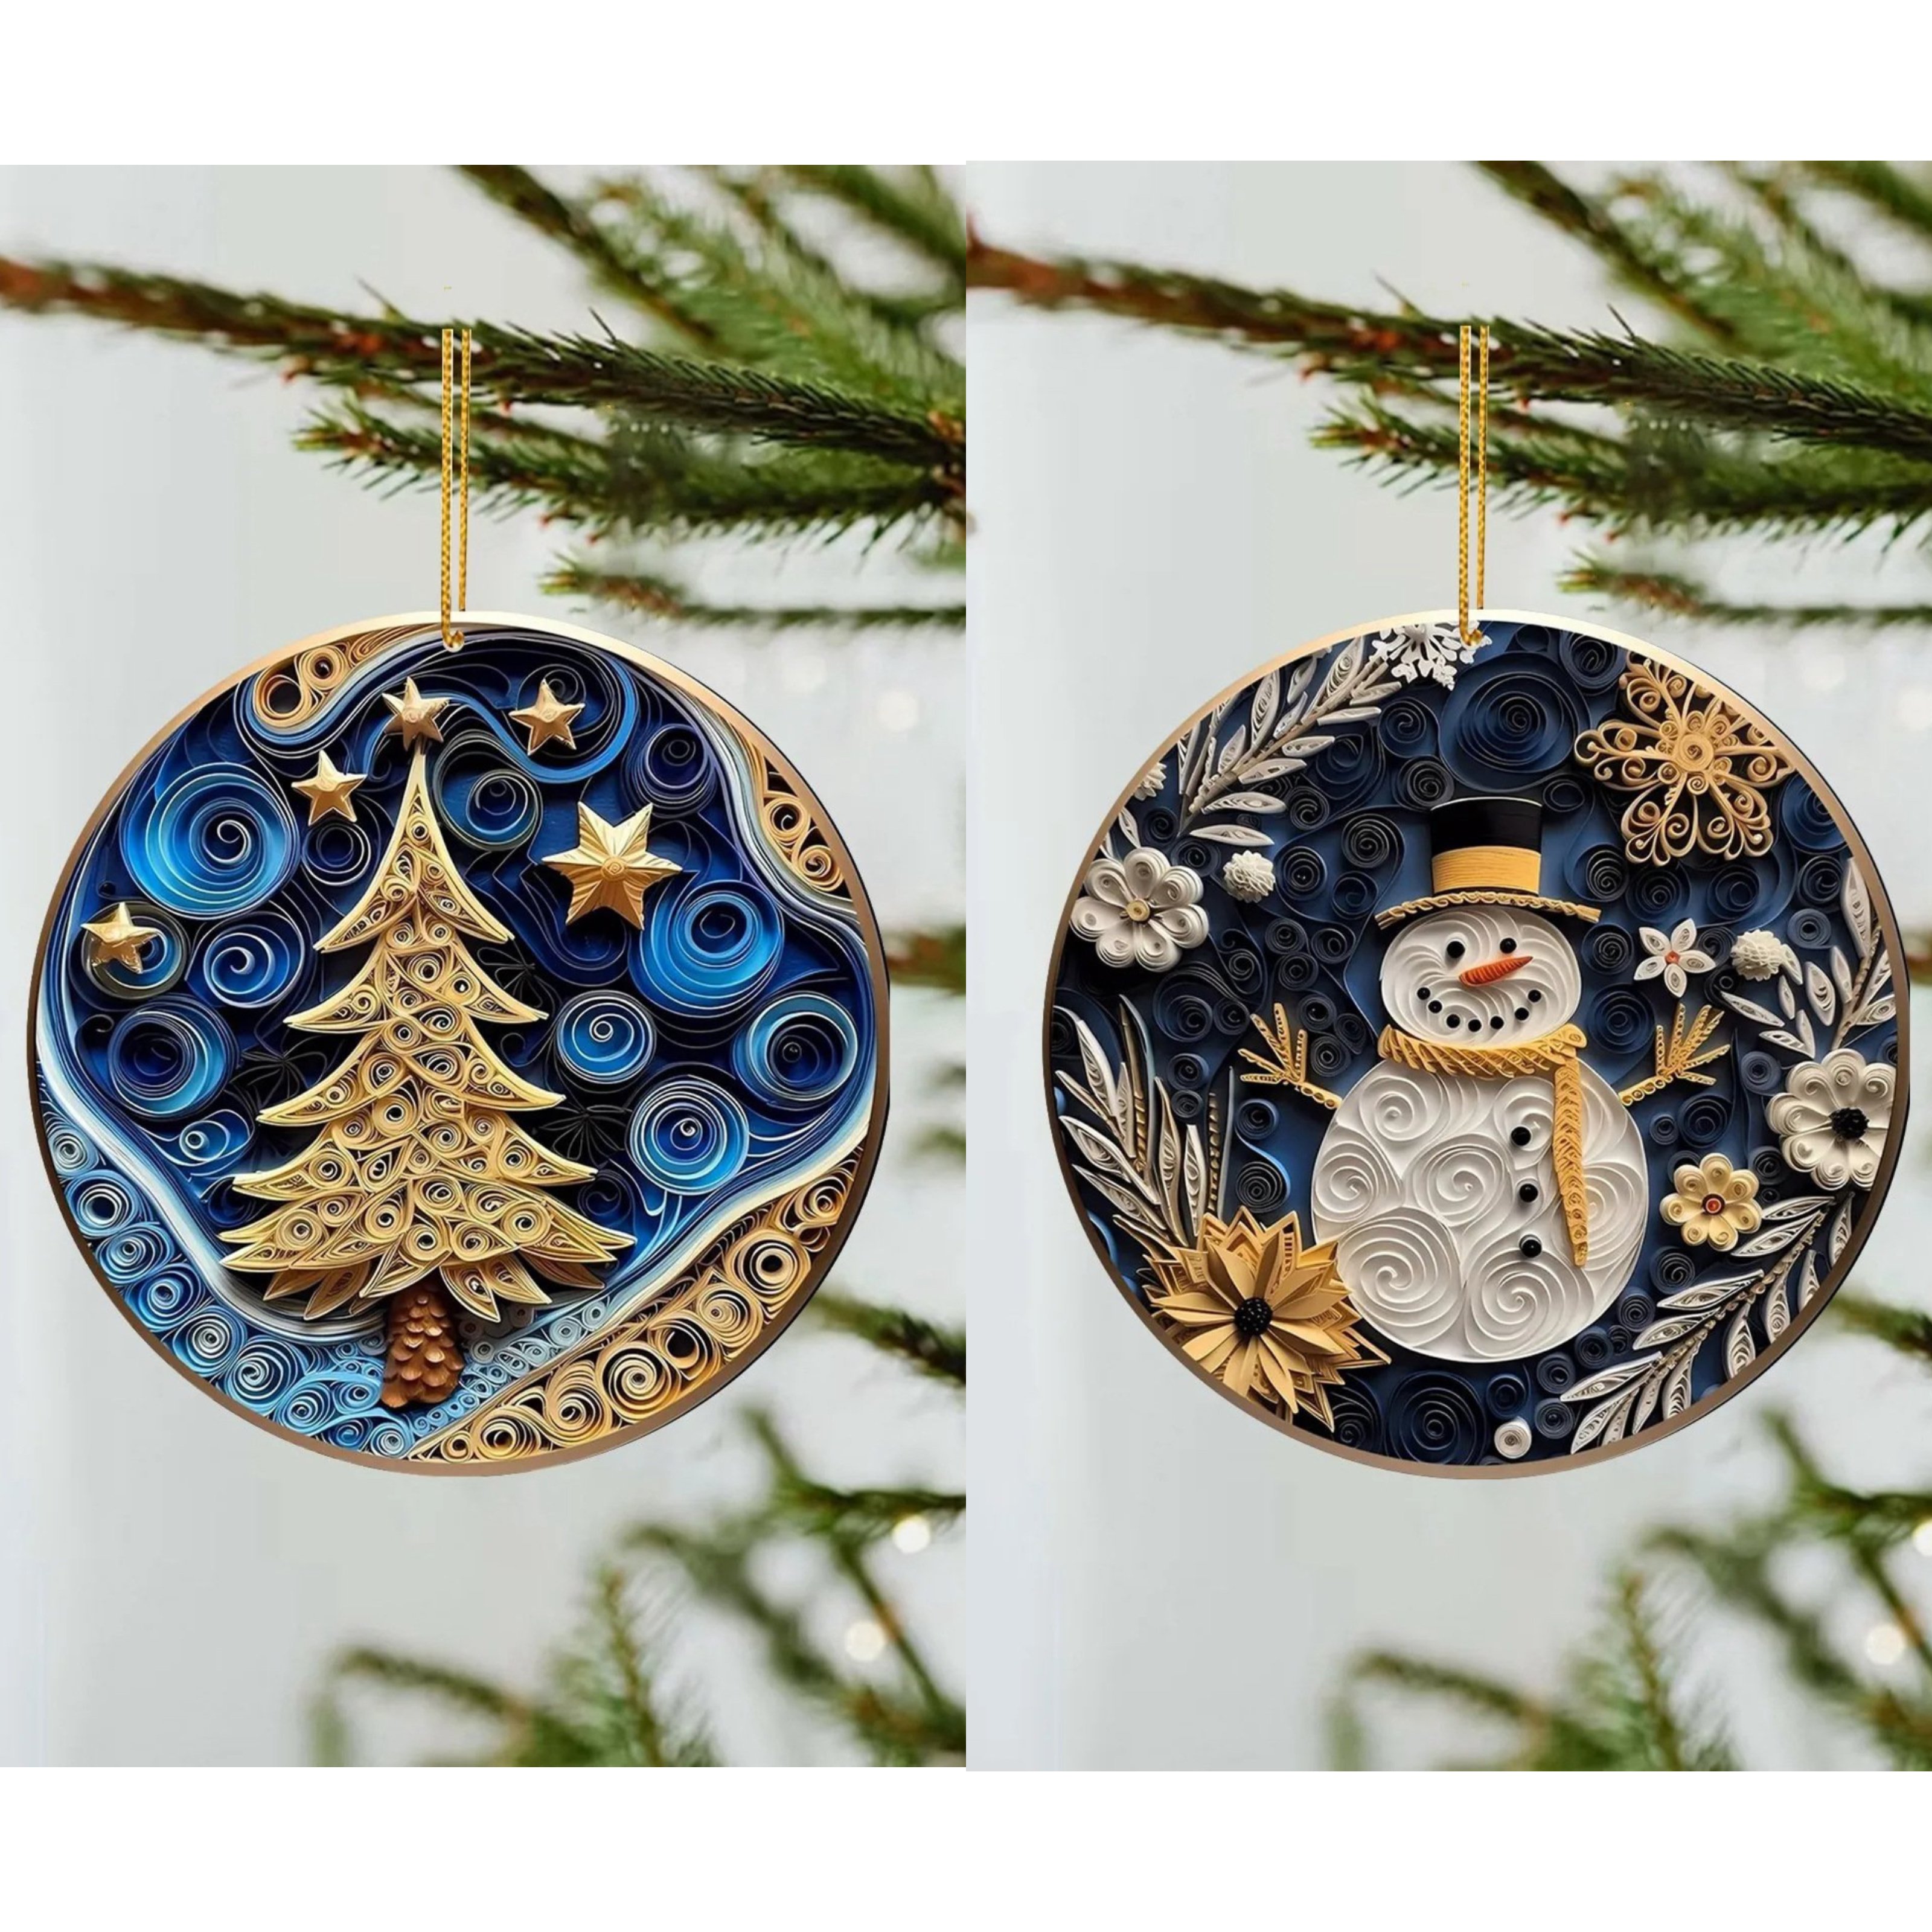 🎁Handmade Ornaments With Good Wishes